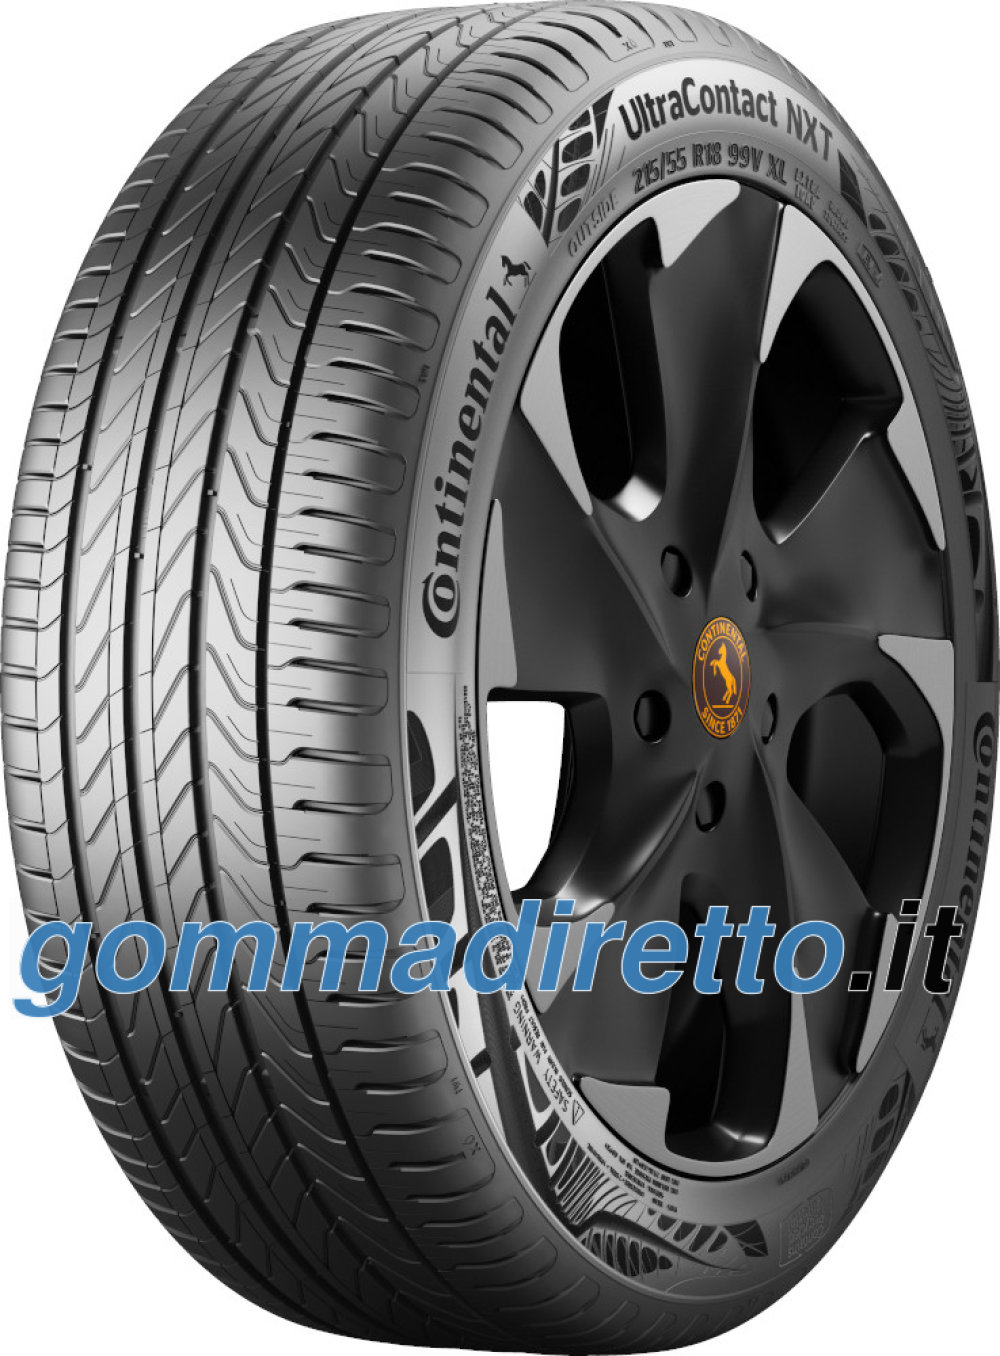 Image of Continental UltraContact NXT - ContiRe.Tex ( 215/55 R18 99V XL CRM, EVc )